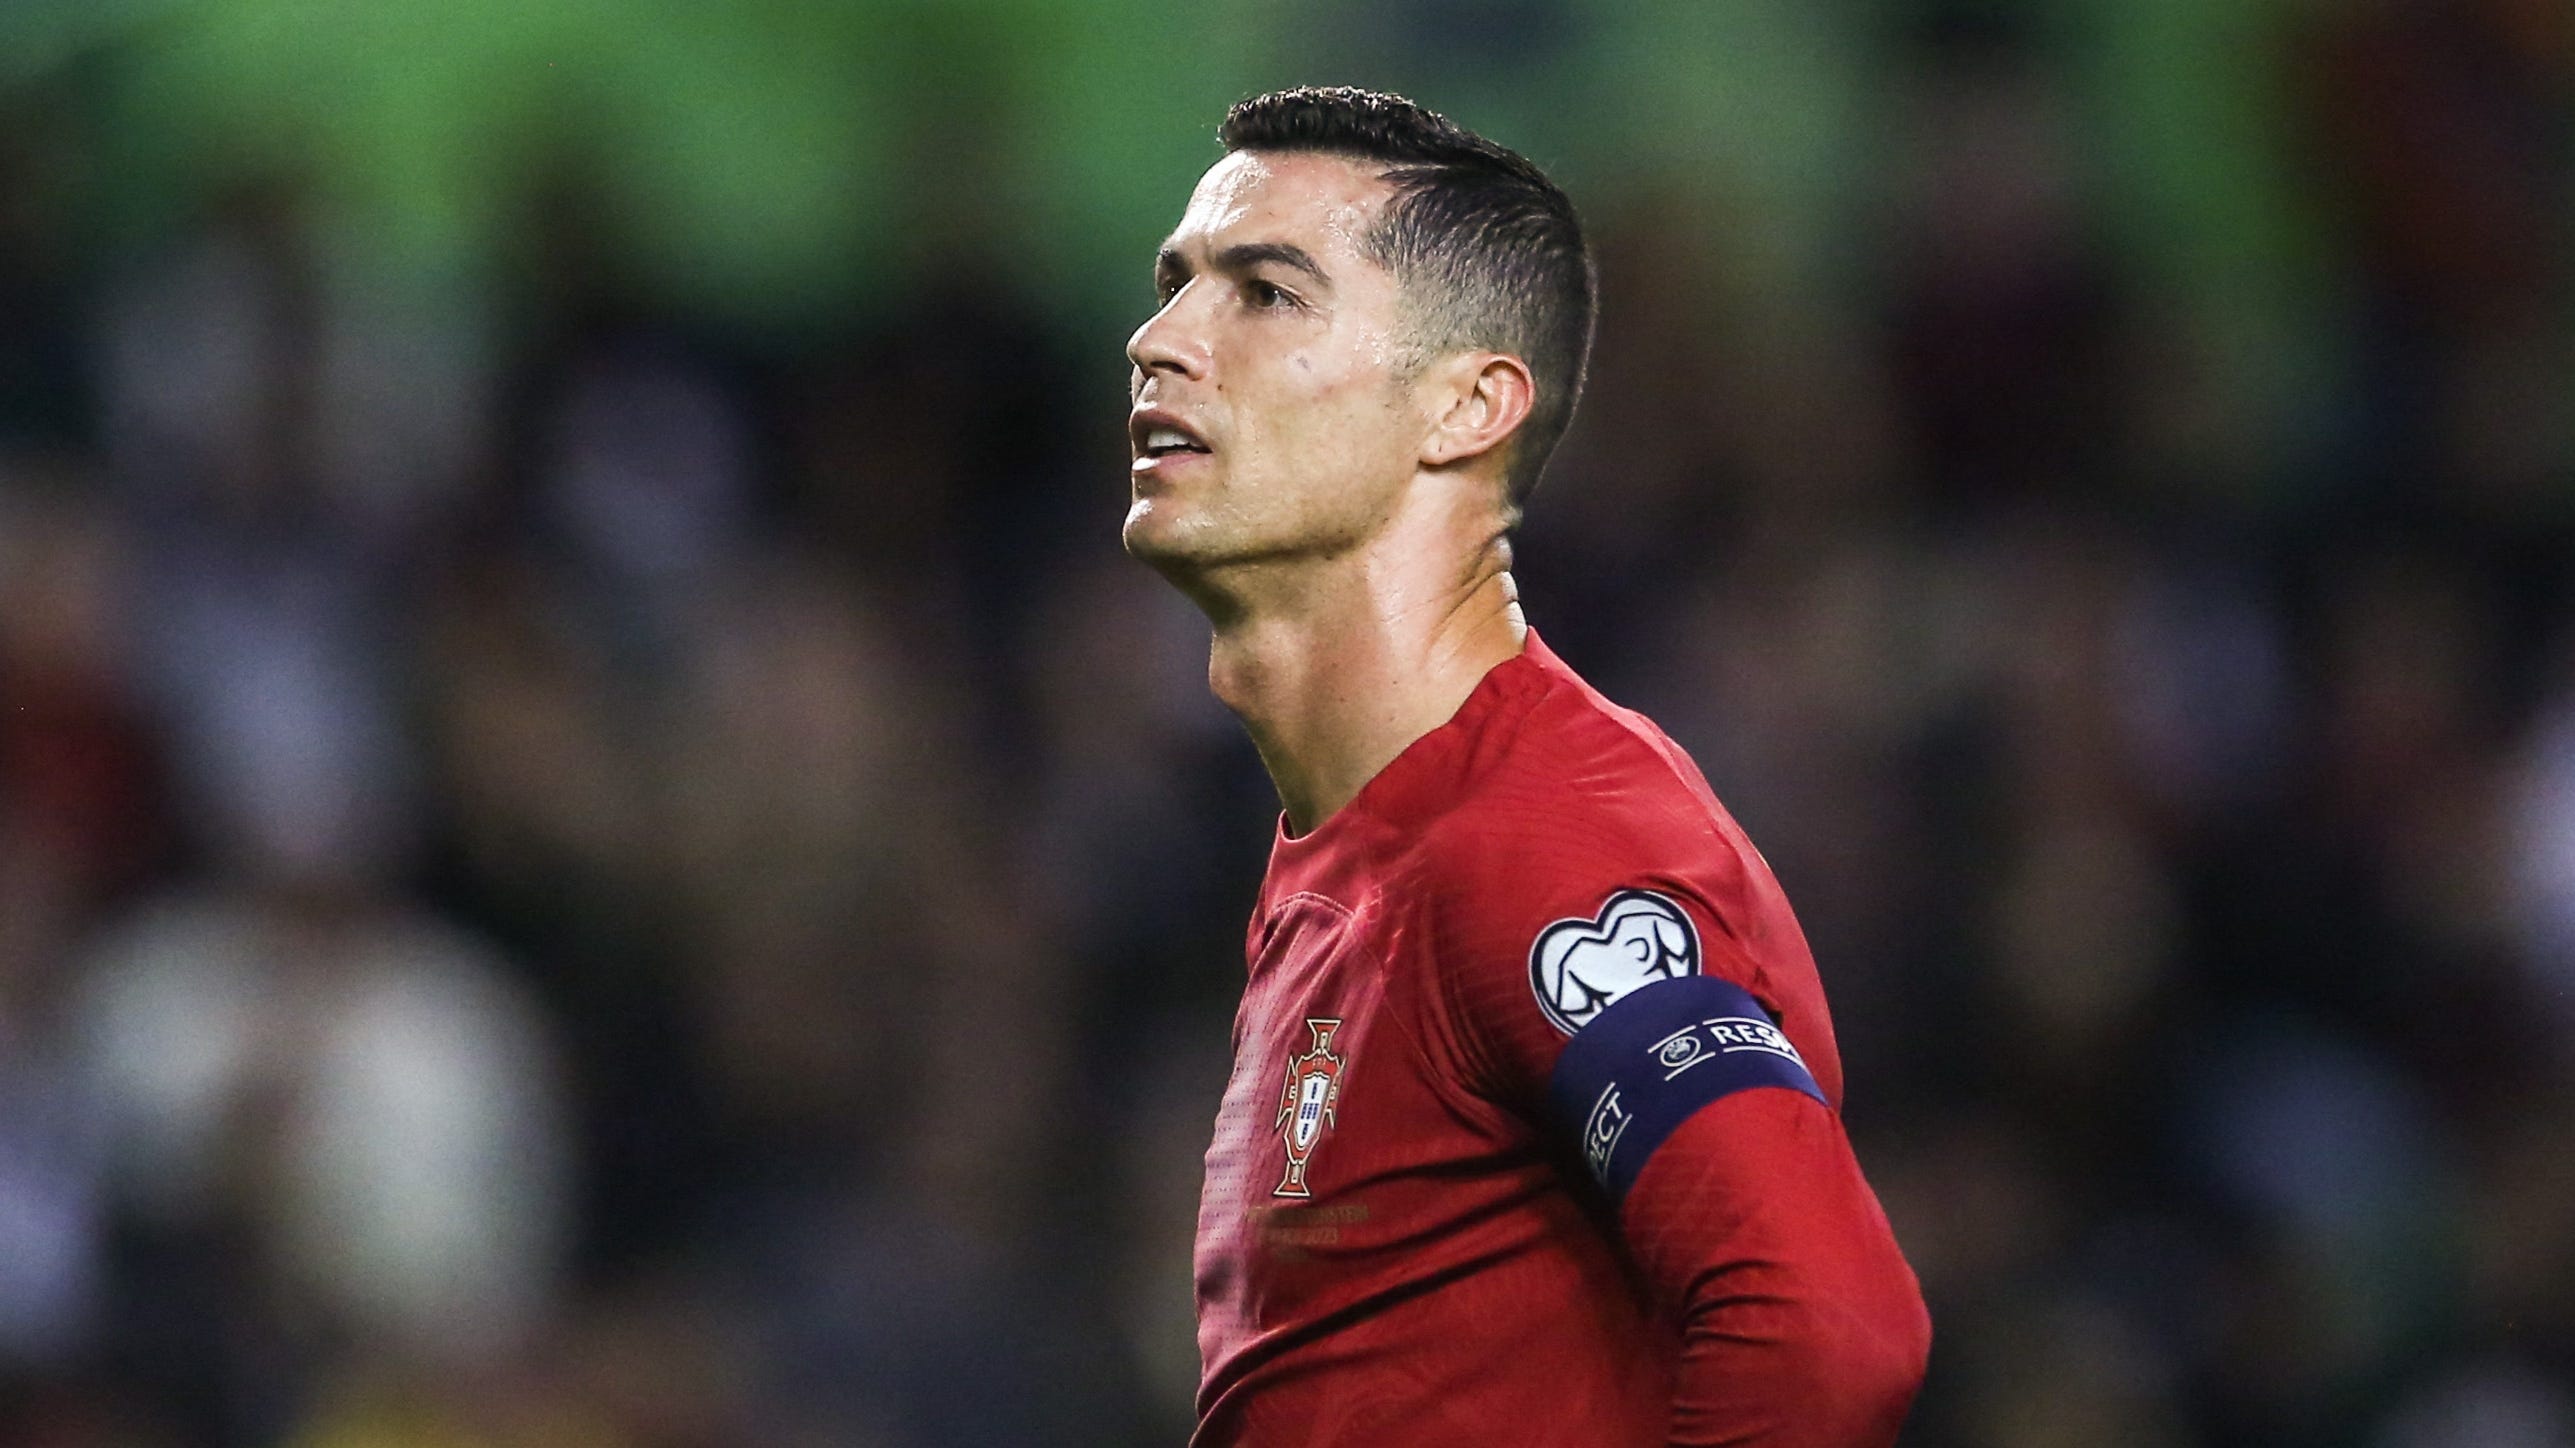 CR7s 20-year run ended! Cristiano Ronaldo misses out on Ballon dOr shortlist for the first time since 2003 Goal US